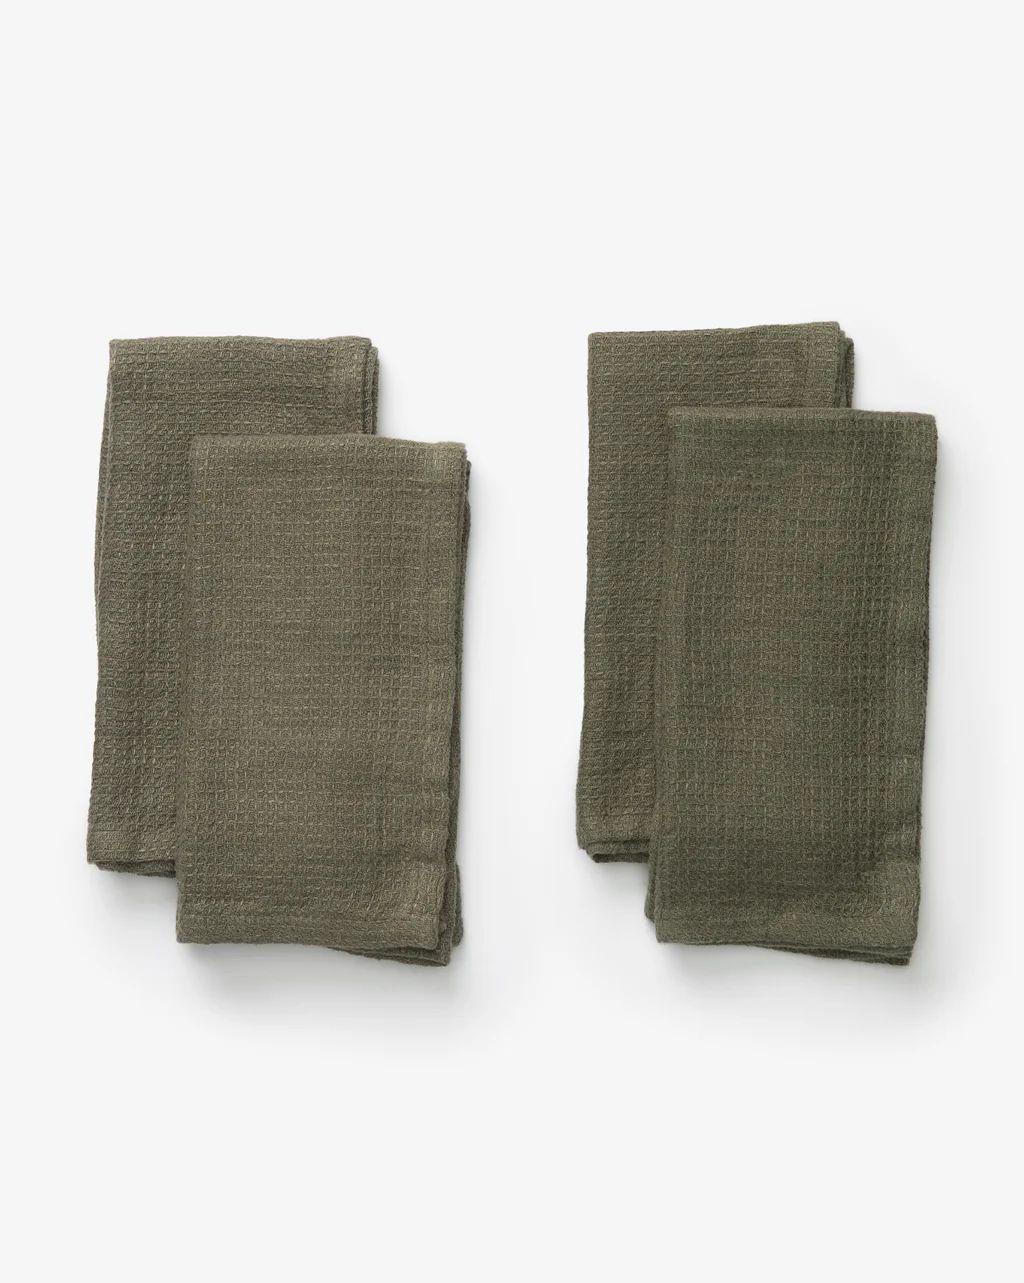 Solid Linen Napkins (Set of 4) | McGee & Co.